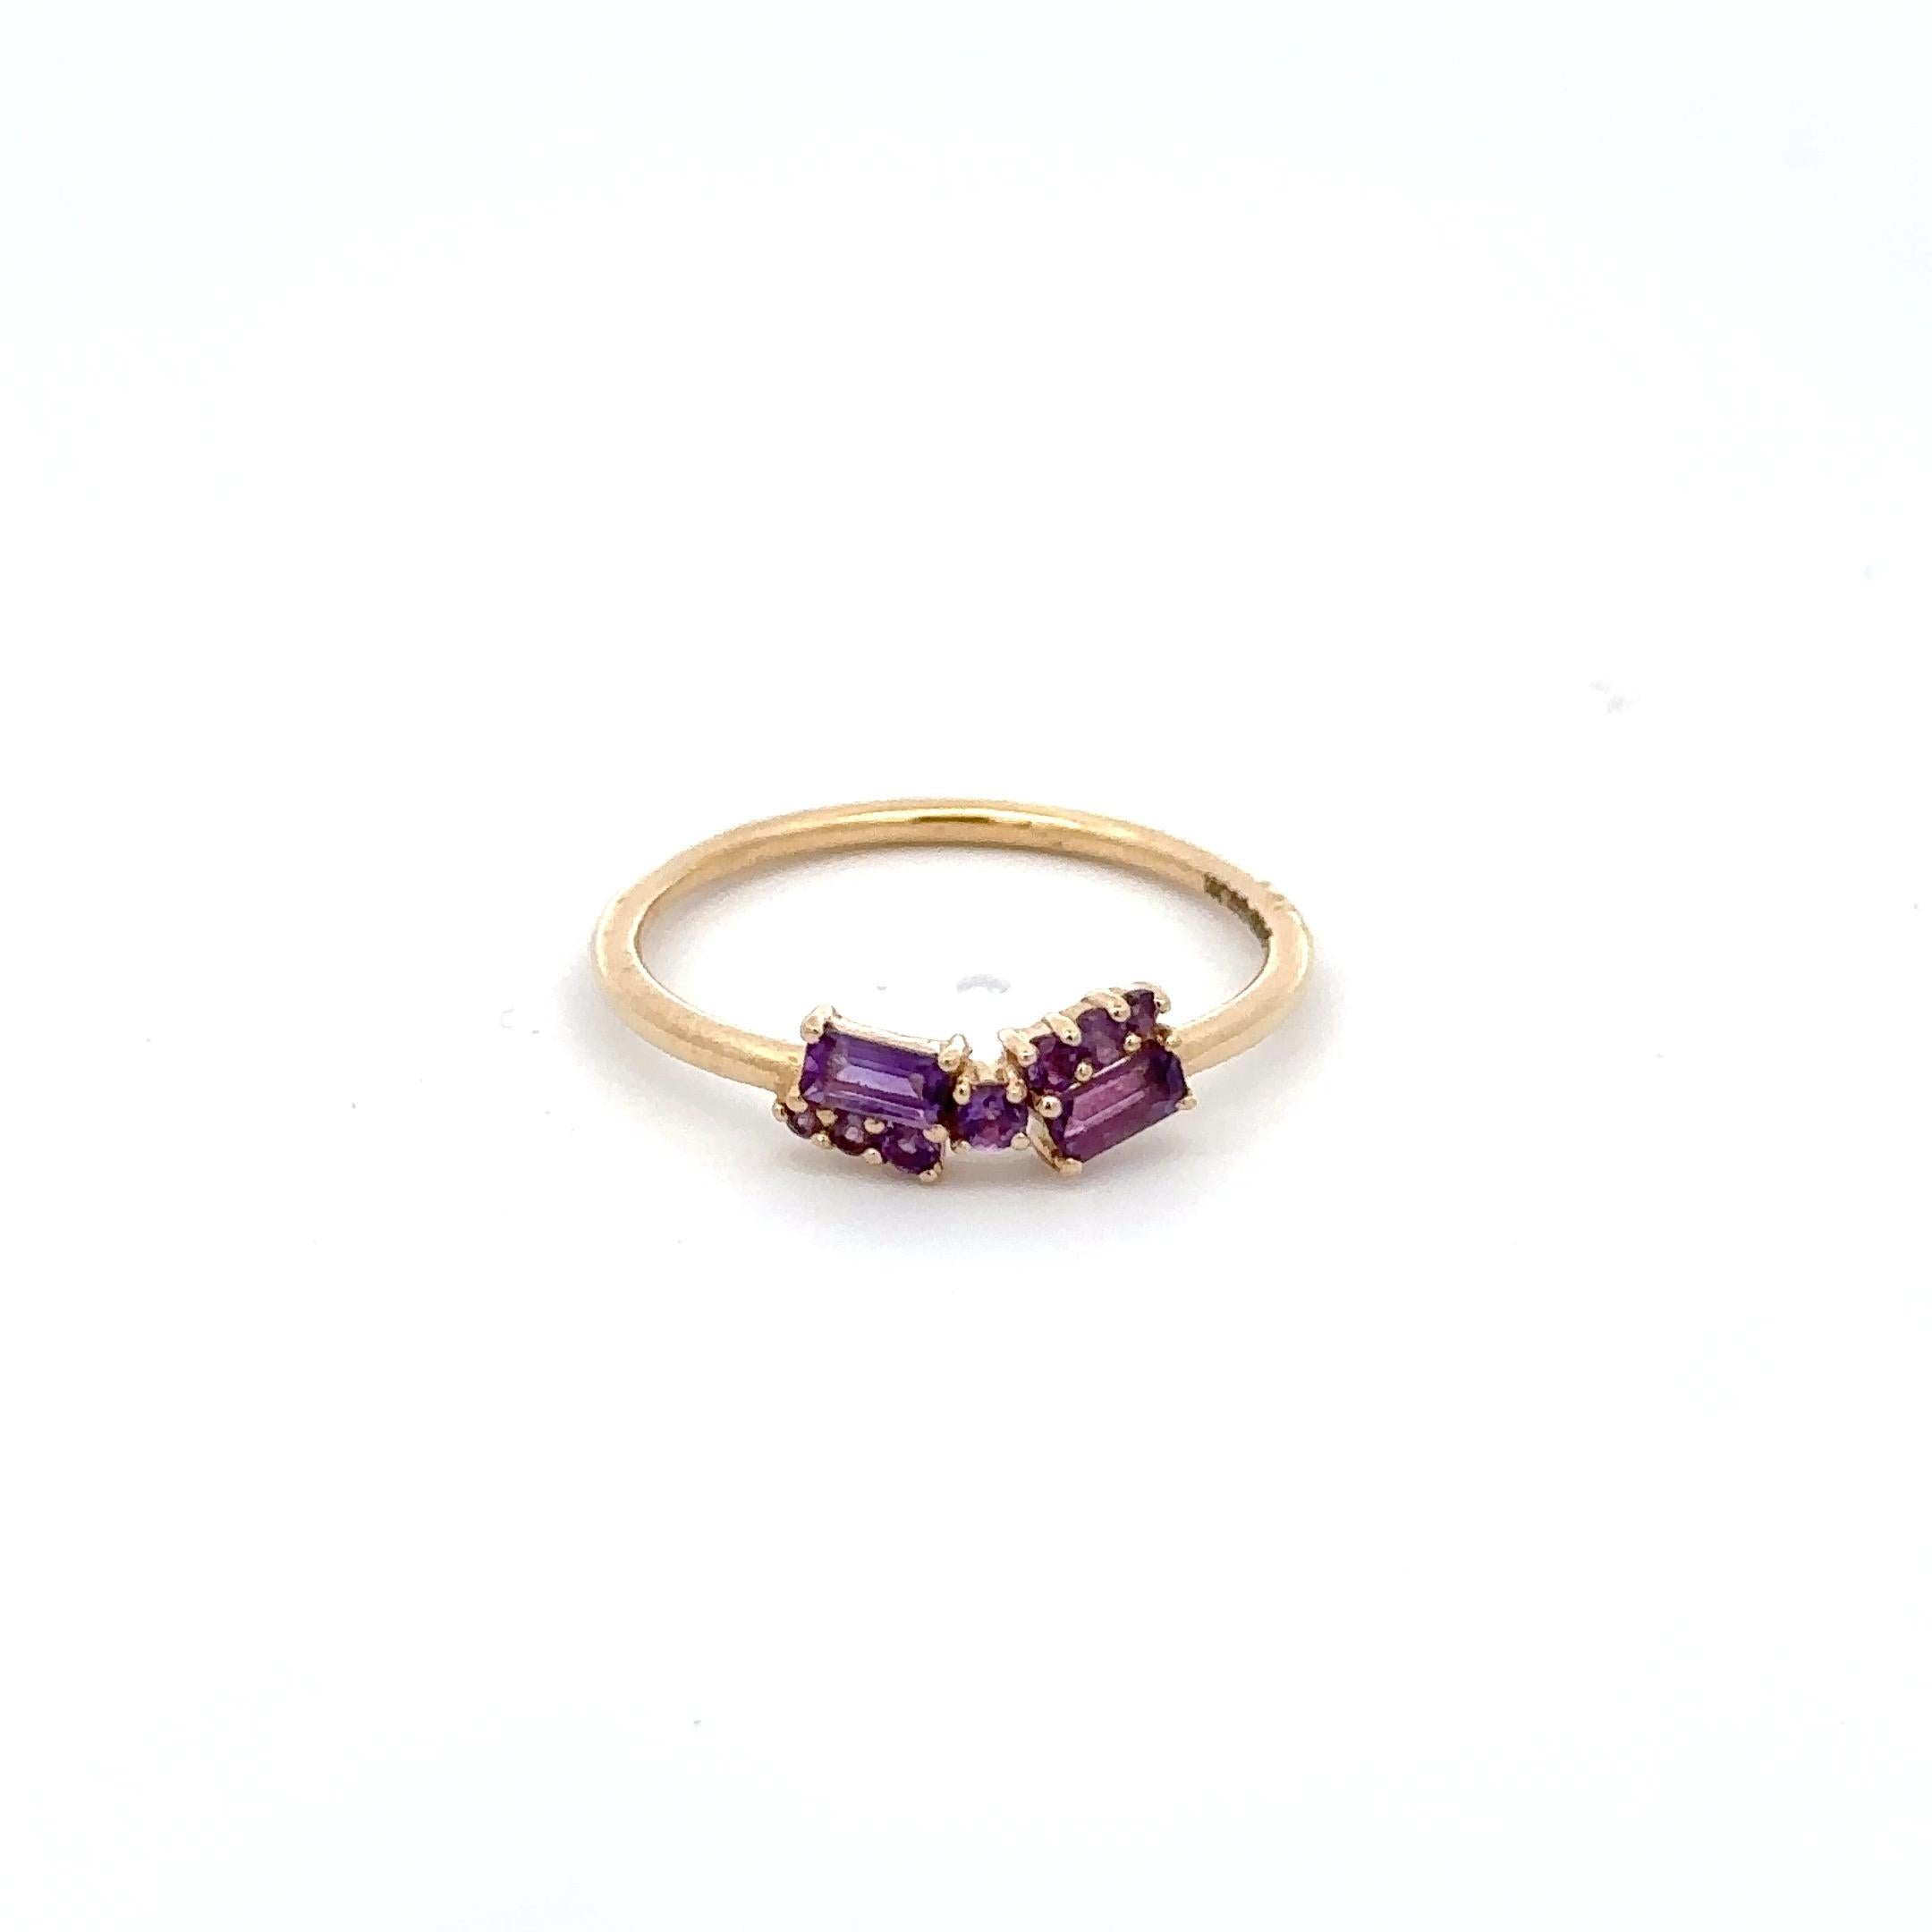 For Sale:  Everyday Wear Asymmetrical Amethyst Ring For Her in 14k Solid Yellow Gold 3